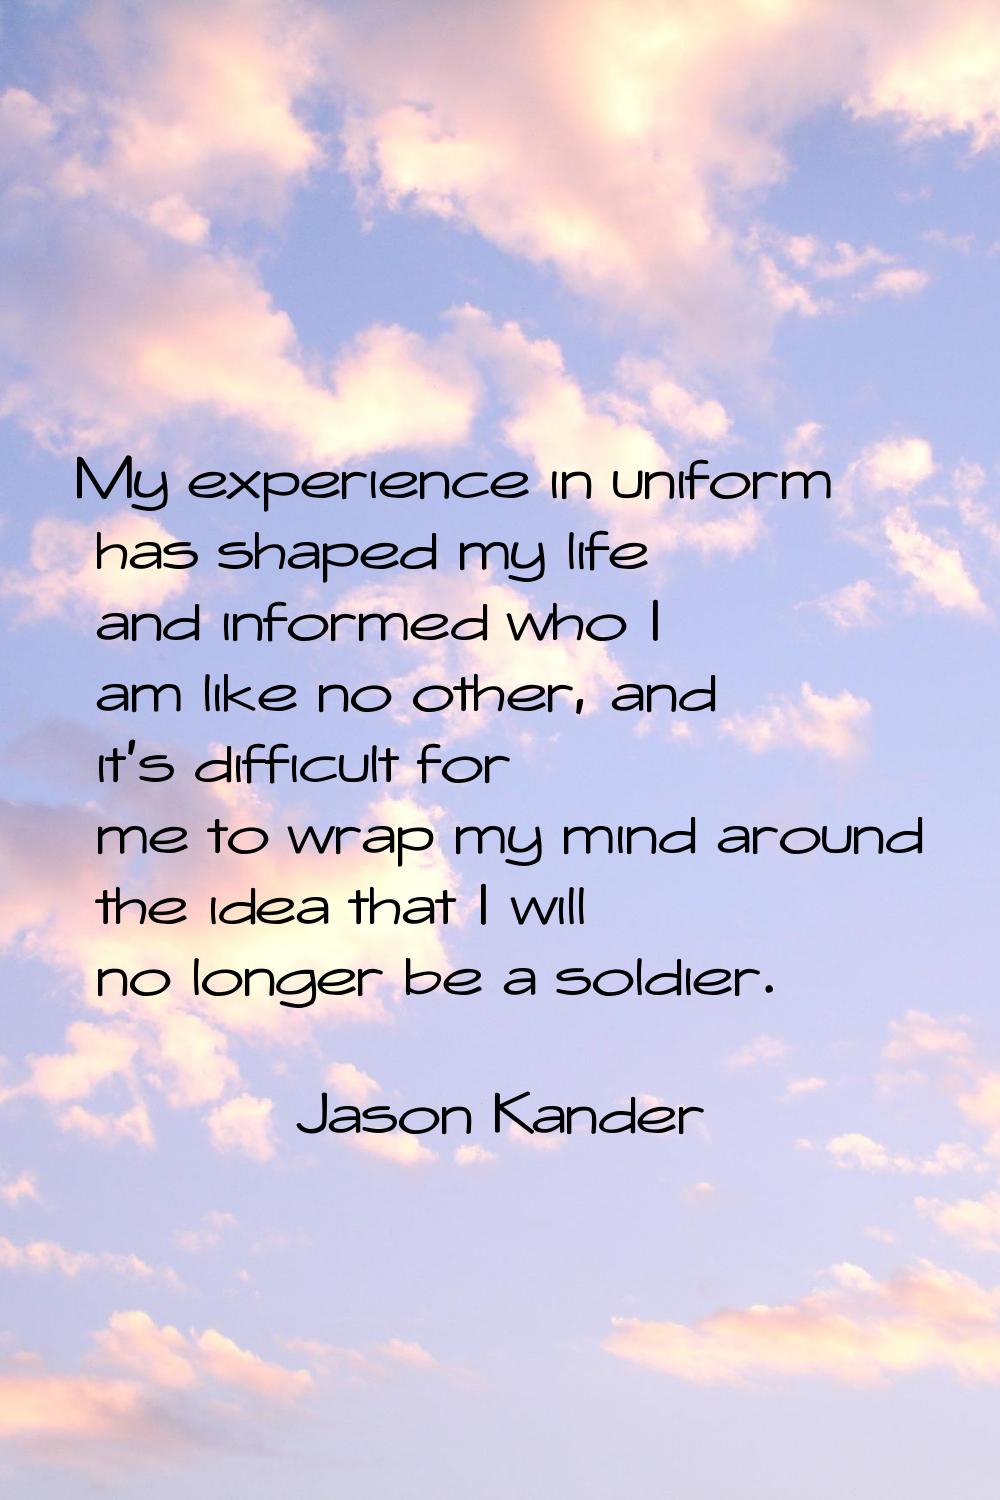 My experience in uniform has shaped my life and informed who I am like no other, and it's difficult